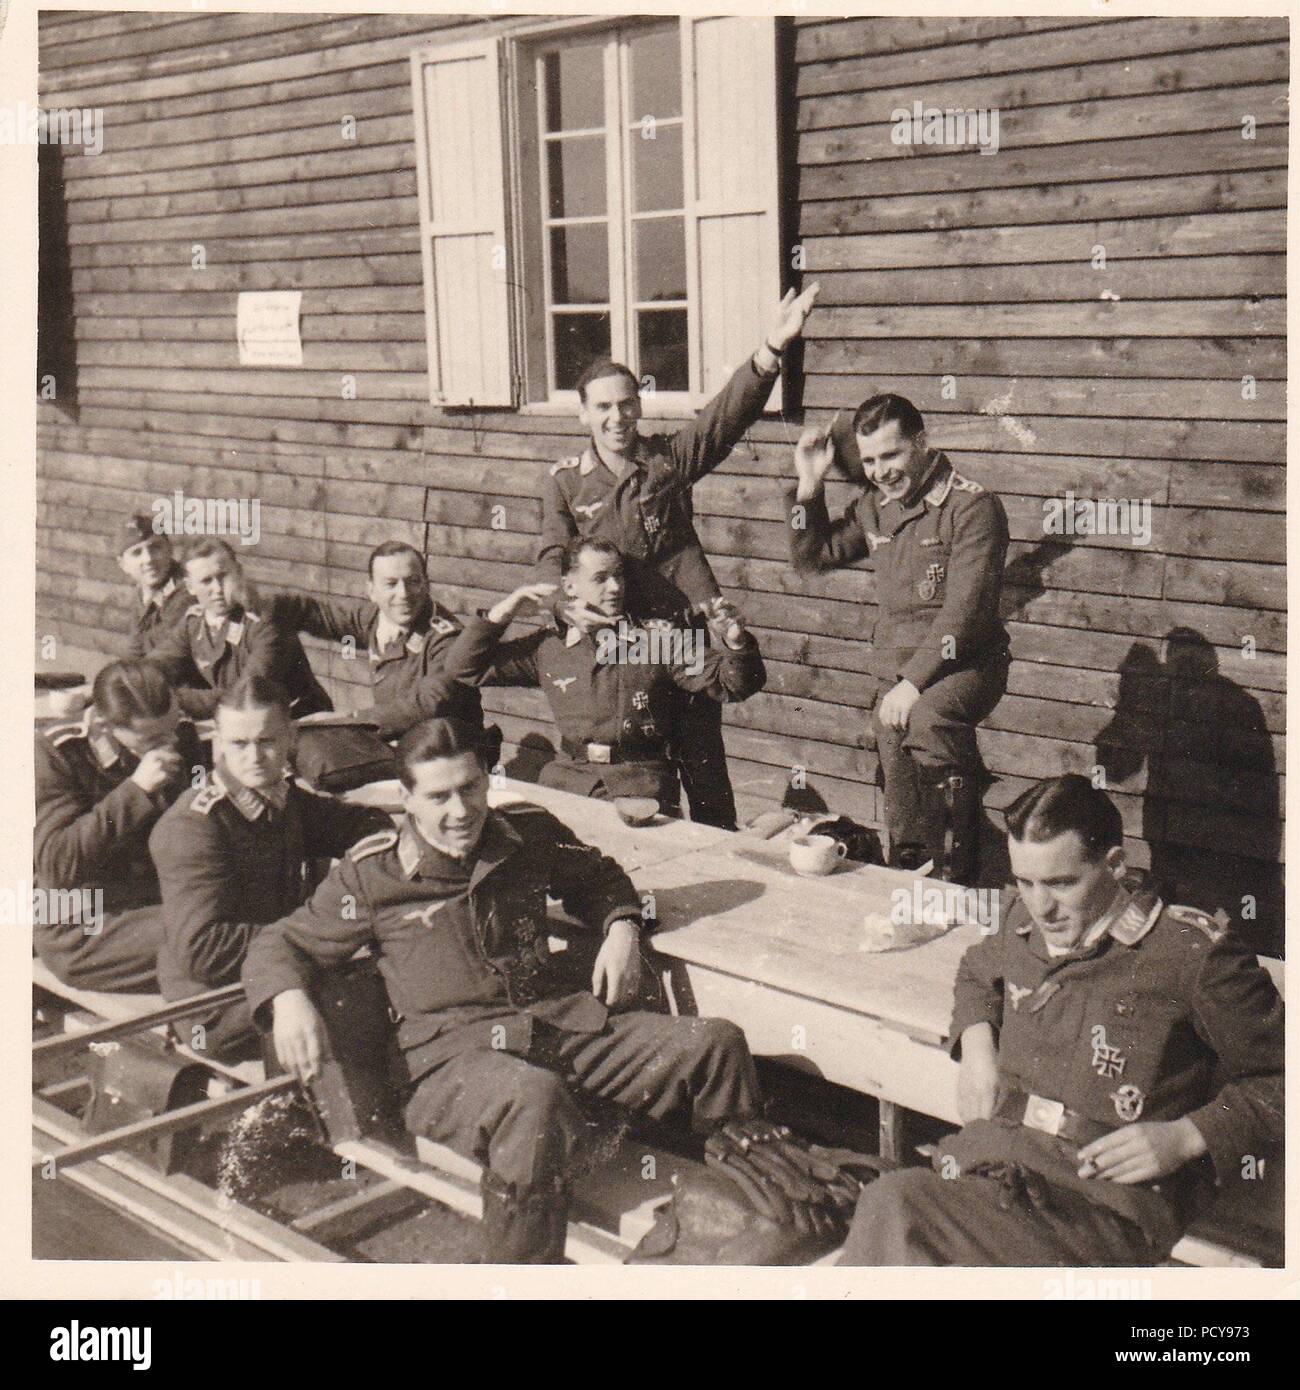 Oberfeldwebel Karl Müller (at rear, standing with arm raised high) relaxes with other aircrew of 1. Staffel, Kampfgeschwader 2 during a stopover at Bucharest during the Balkan Campaign in 1941. Müller was awarded the Knight's Cross of the Iron Cross on 15th October 1942. Stock Photo